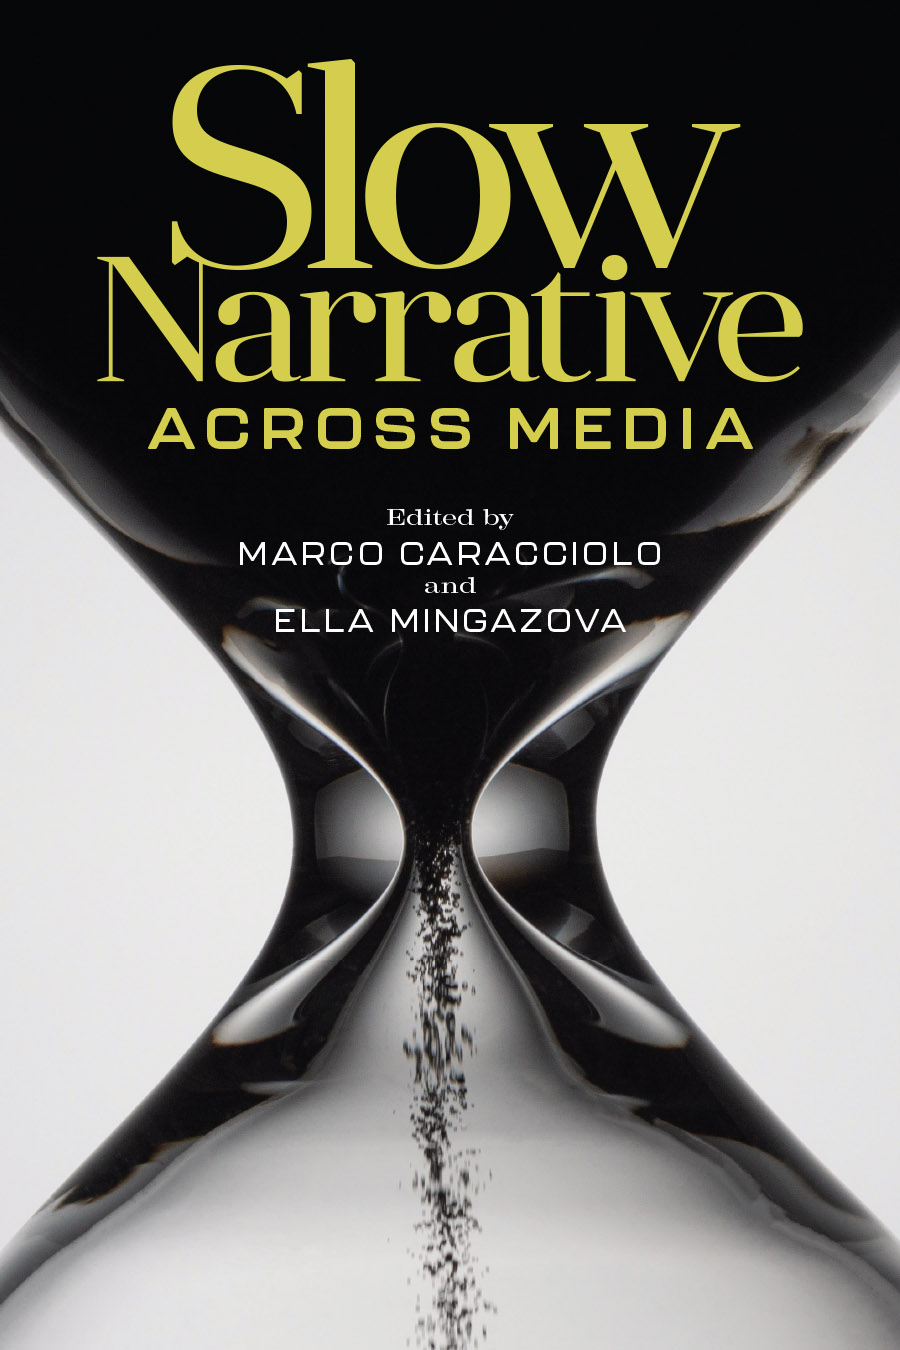 Front cover of Slow Narrative across Media, Edited by Marco Caracciolo and Ella Mingazova, featuring a zoomed-in large image of an hourglass, showing the sands trickling from top to bottom.